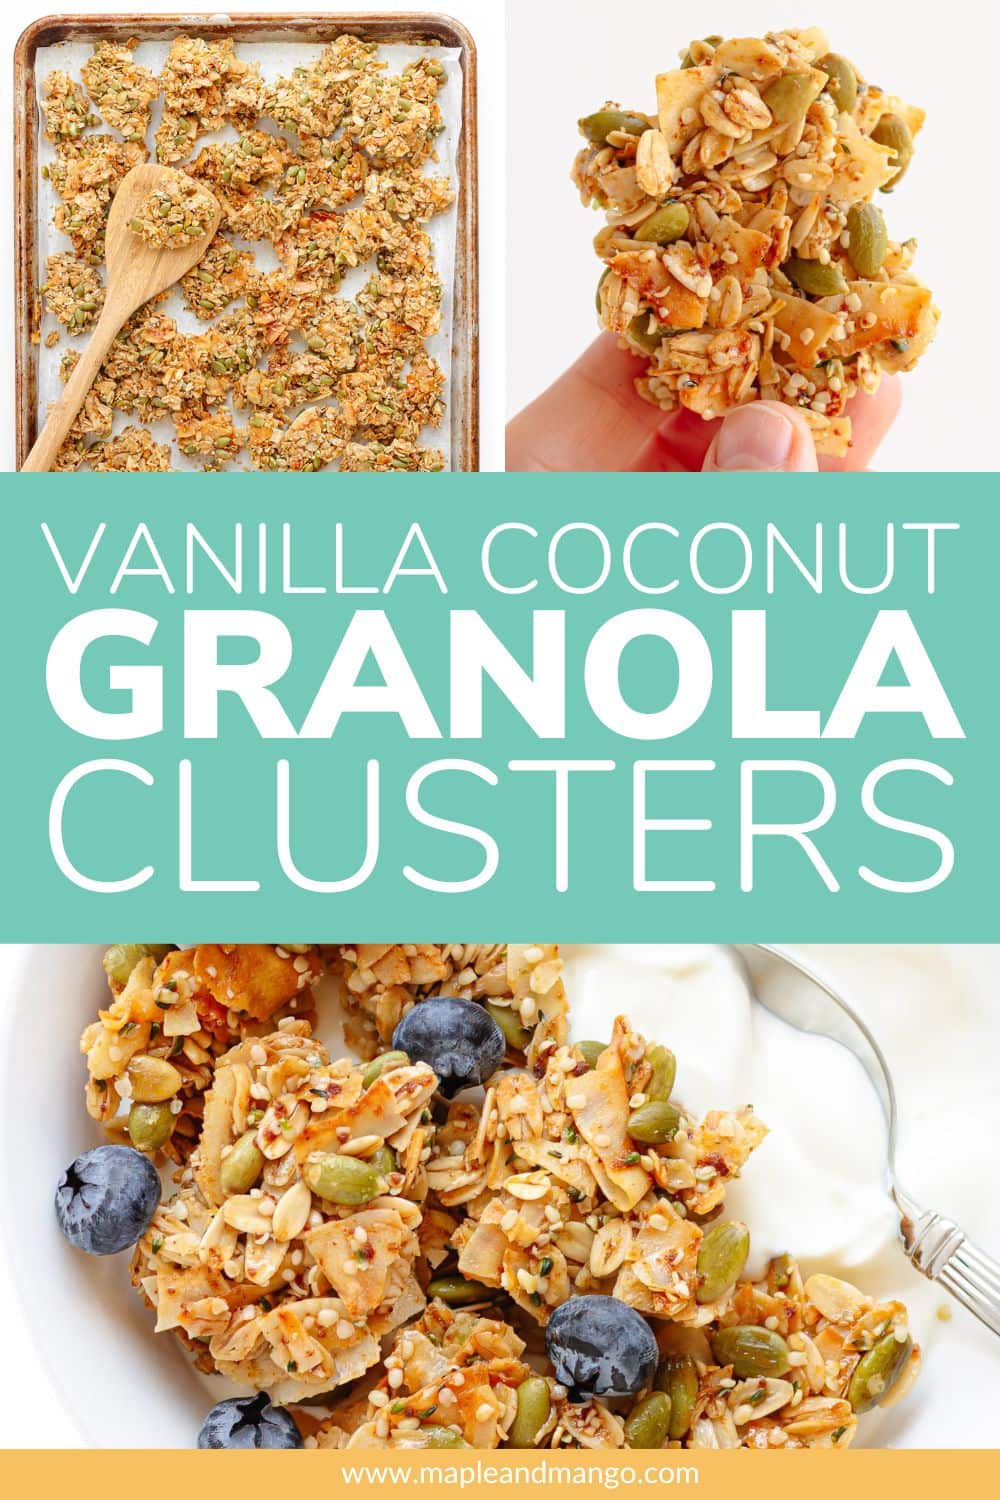 Photo collage graphic showing multiple images of granola clusters with text overlay that reads "Vanilla Coconut Granola Clusters".